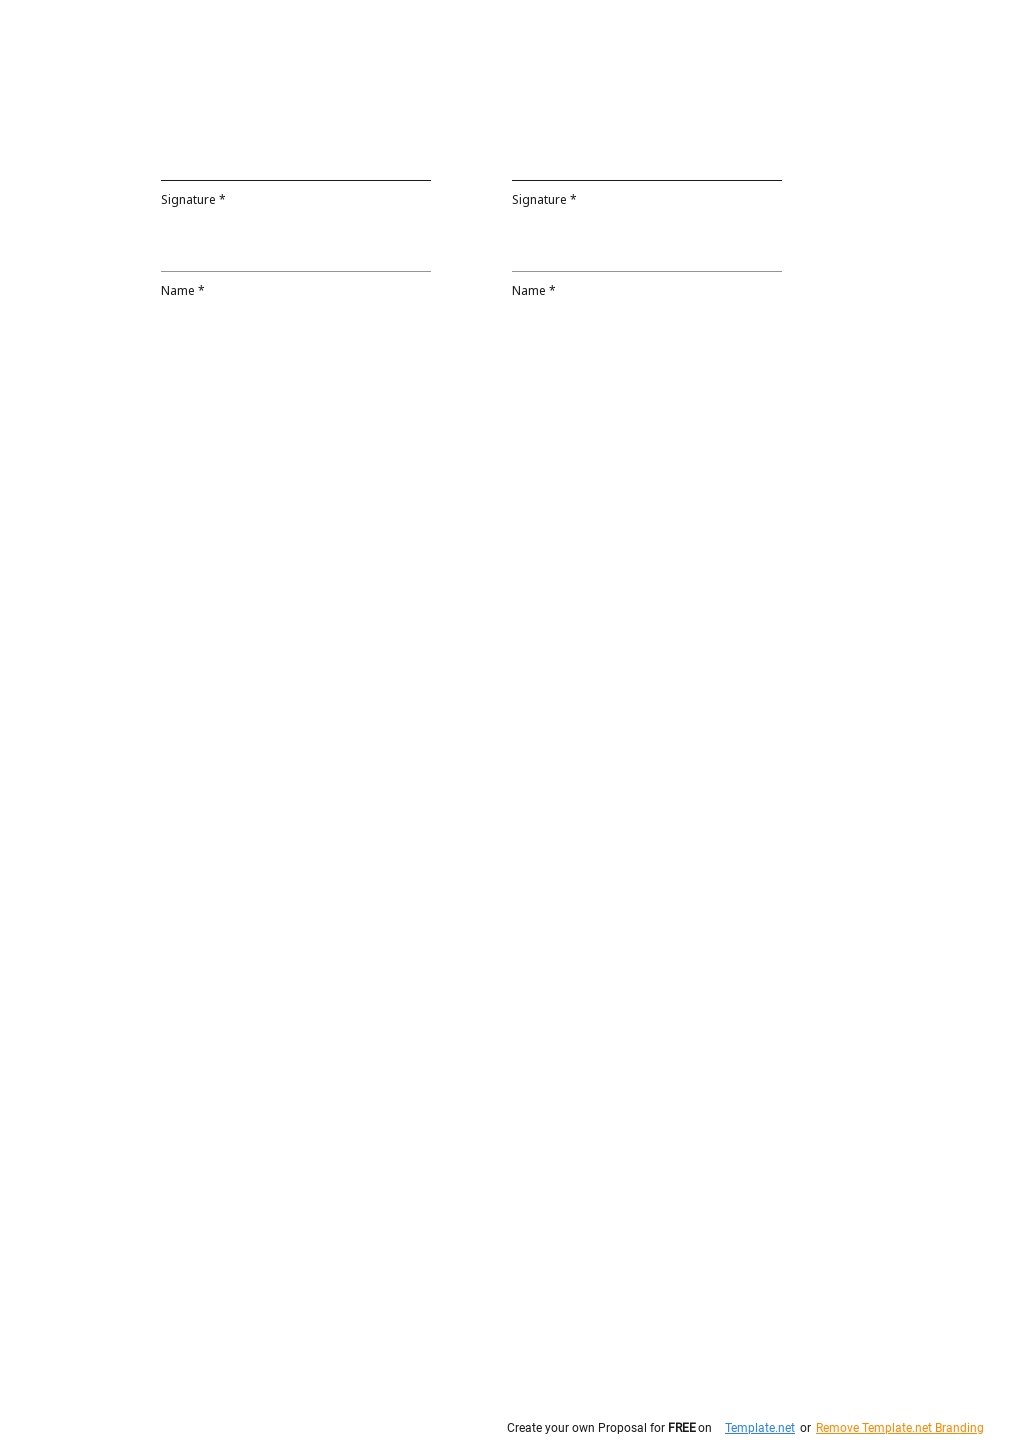 Accounting Outsourcing Agreement Template 2.jpe